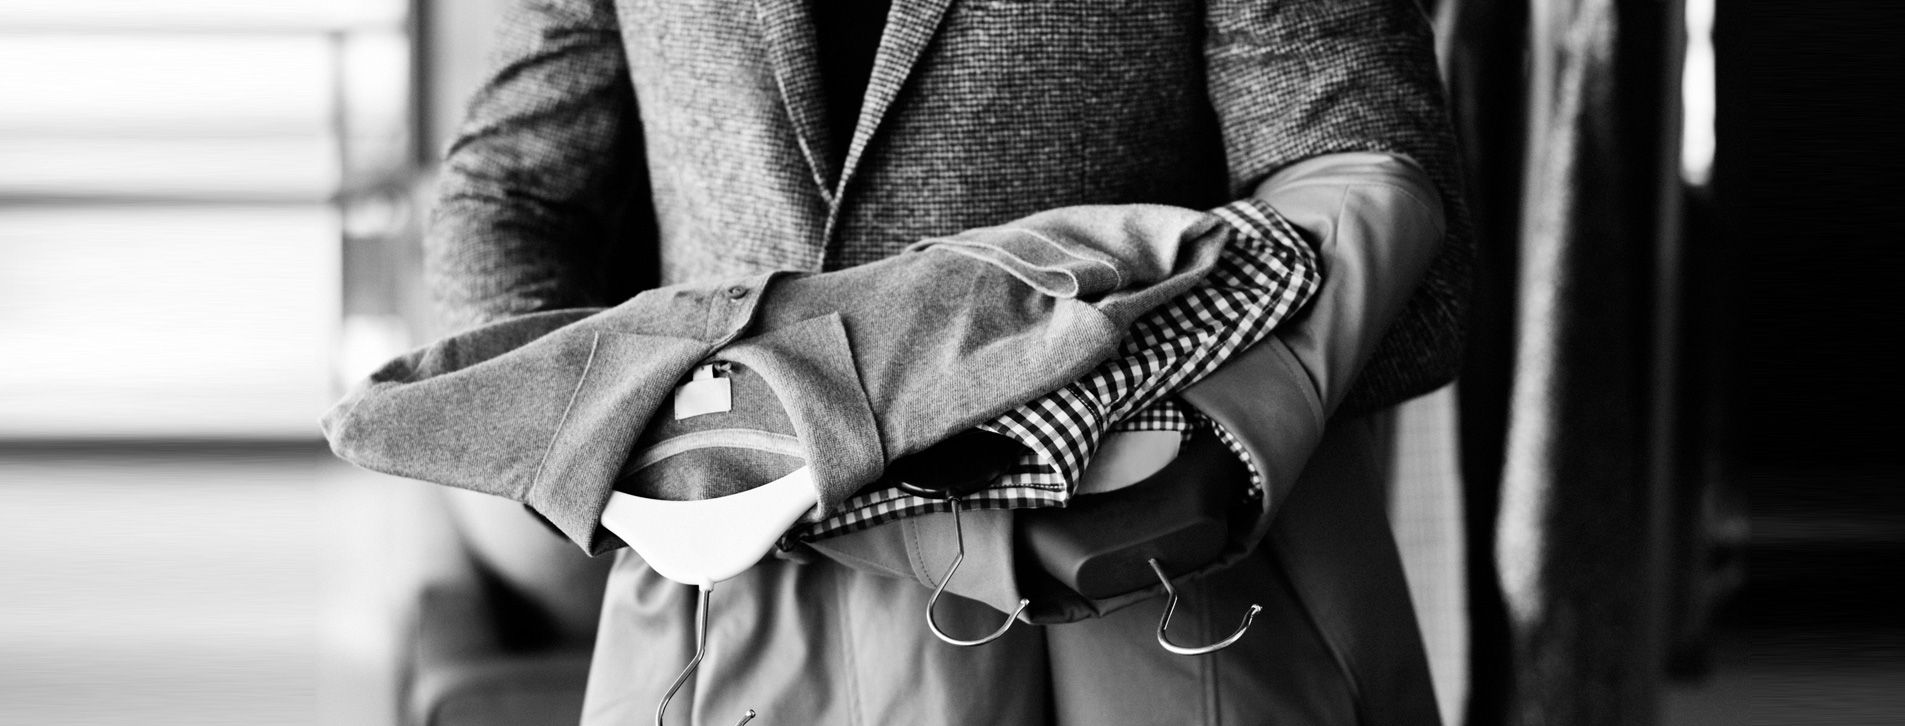 Personal Styling Service for Men